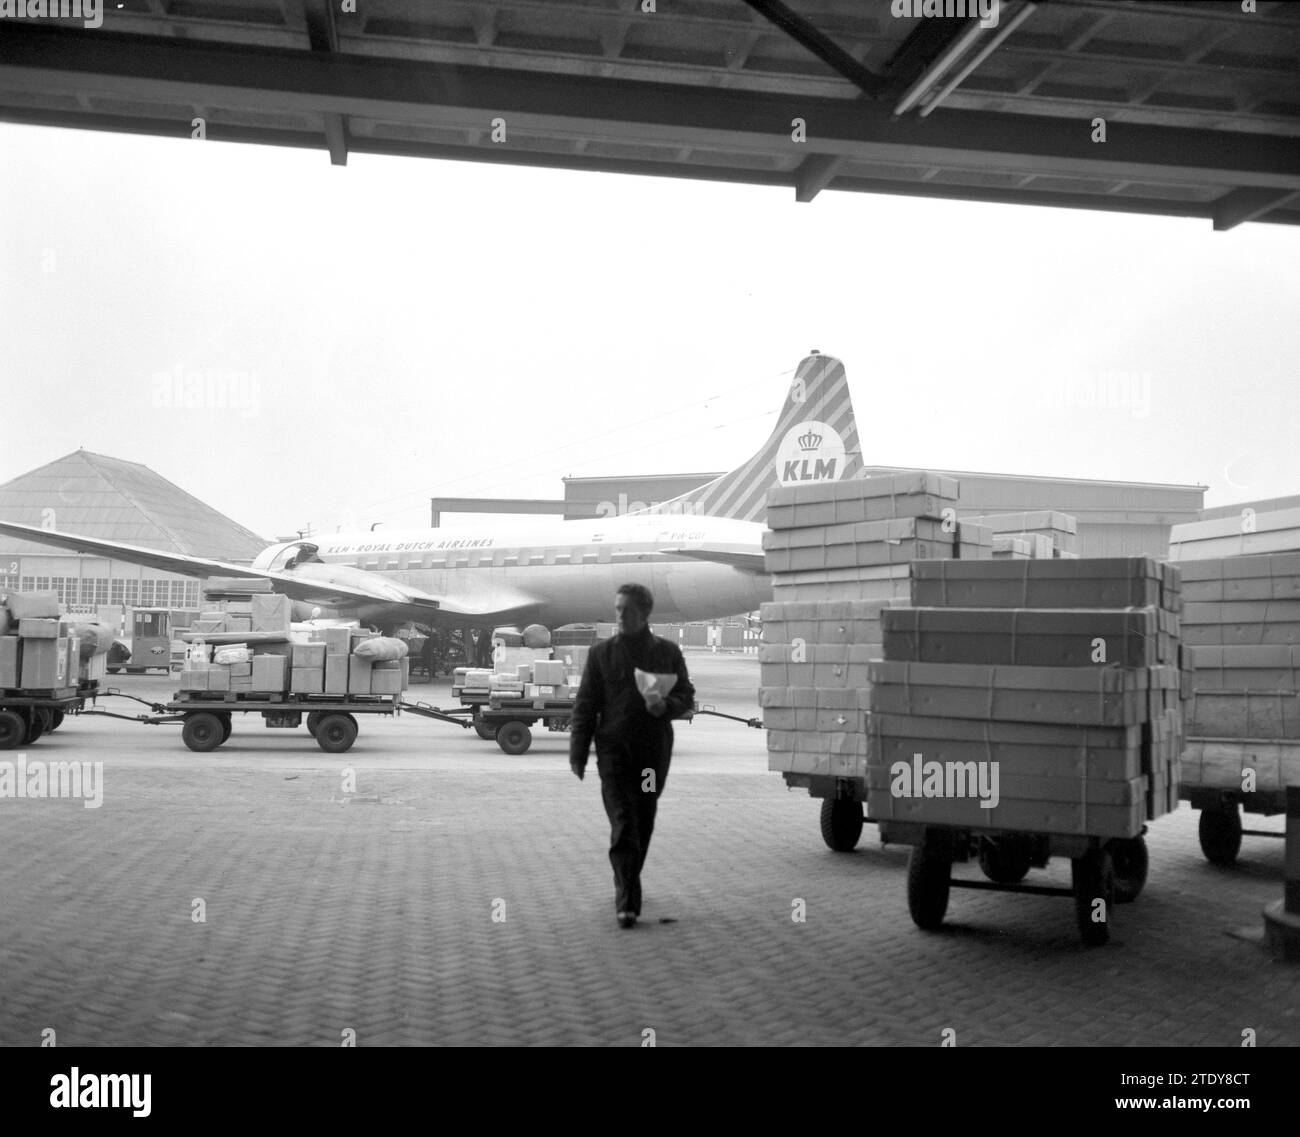 Worker in a hangar at Schiphol during the Christmas rush, KLM airplane and cargo trailer in the background ca. December 20, 1962 Stock Photo